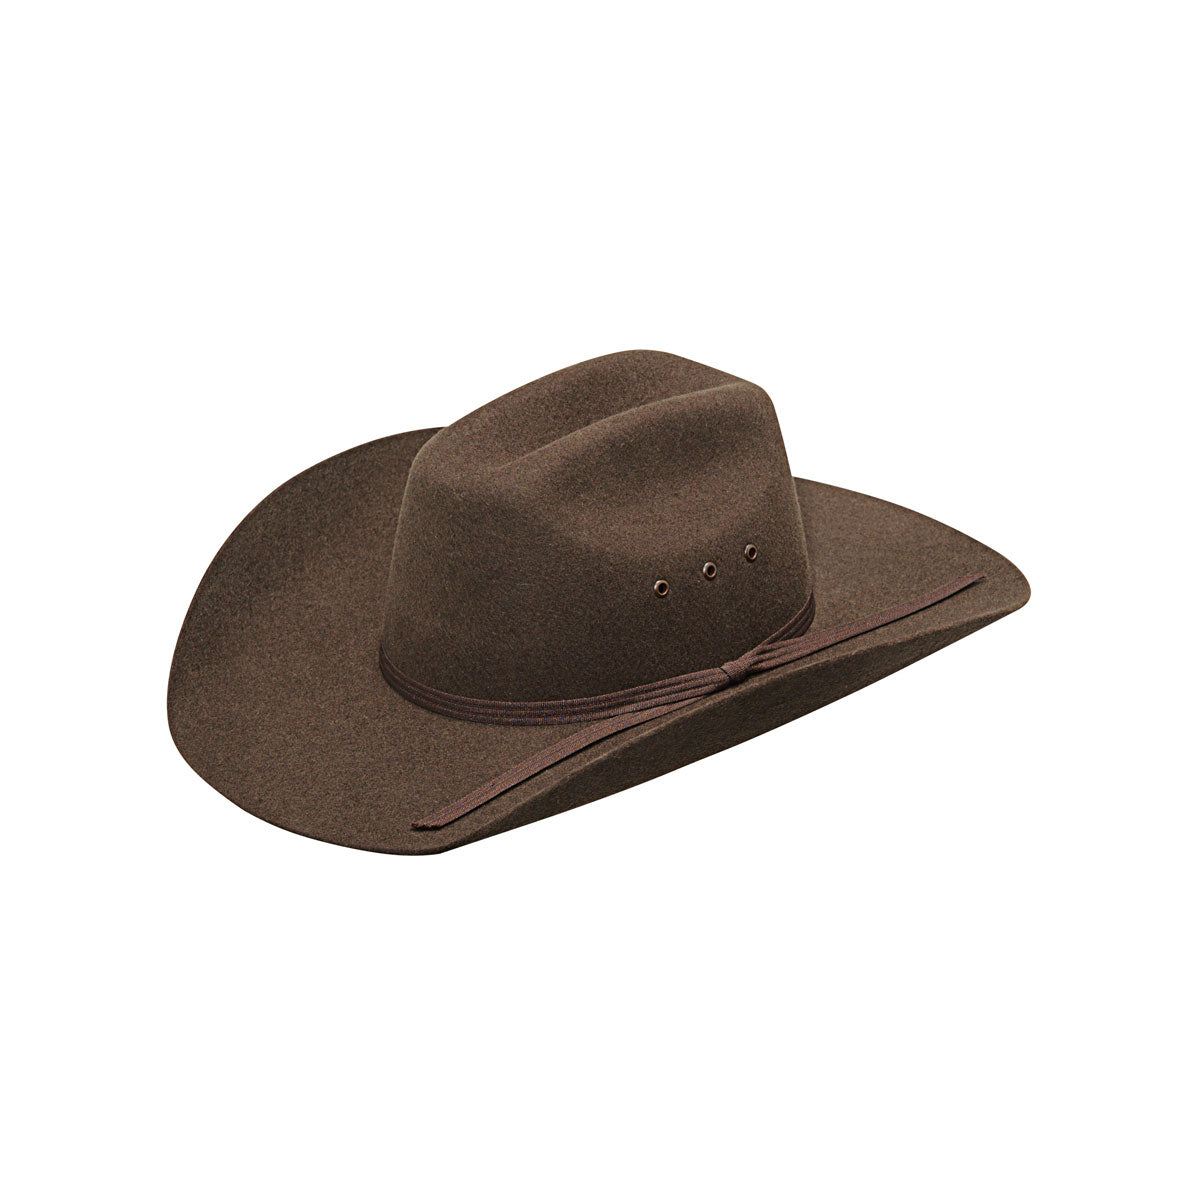 TWISTER YOUTH BROWN WOOL WESTERN HAT